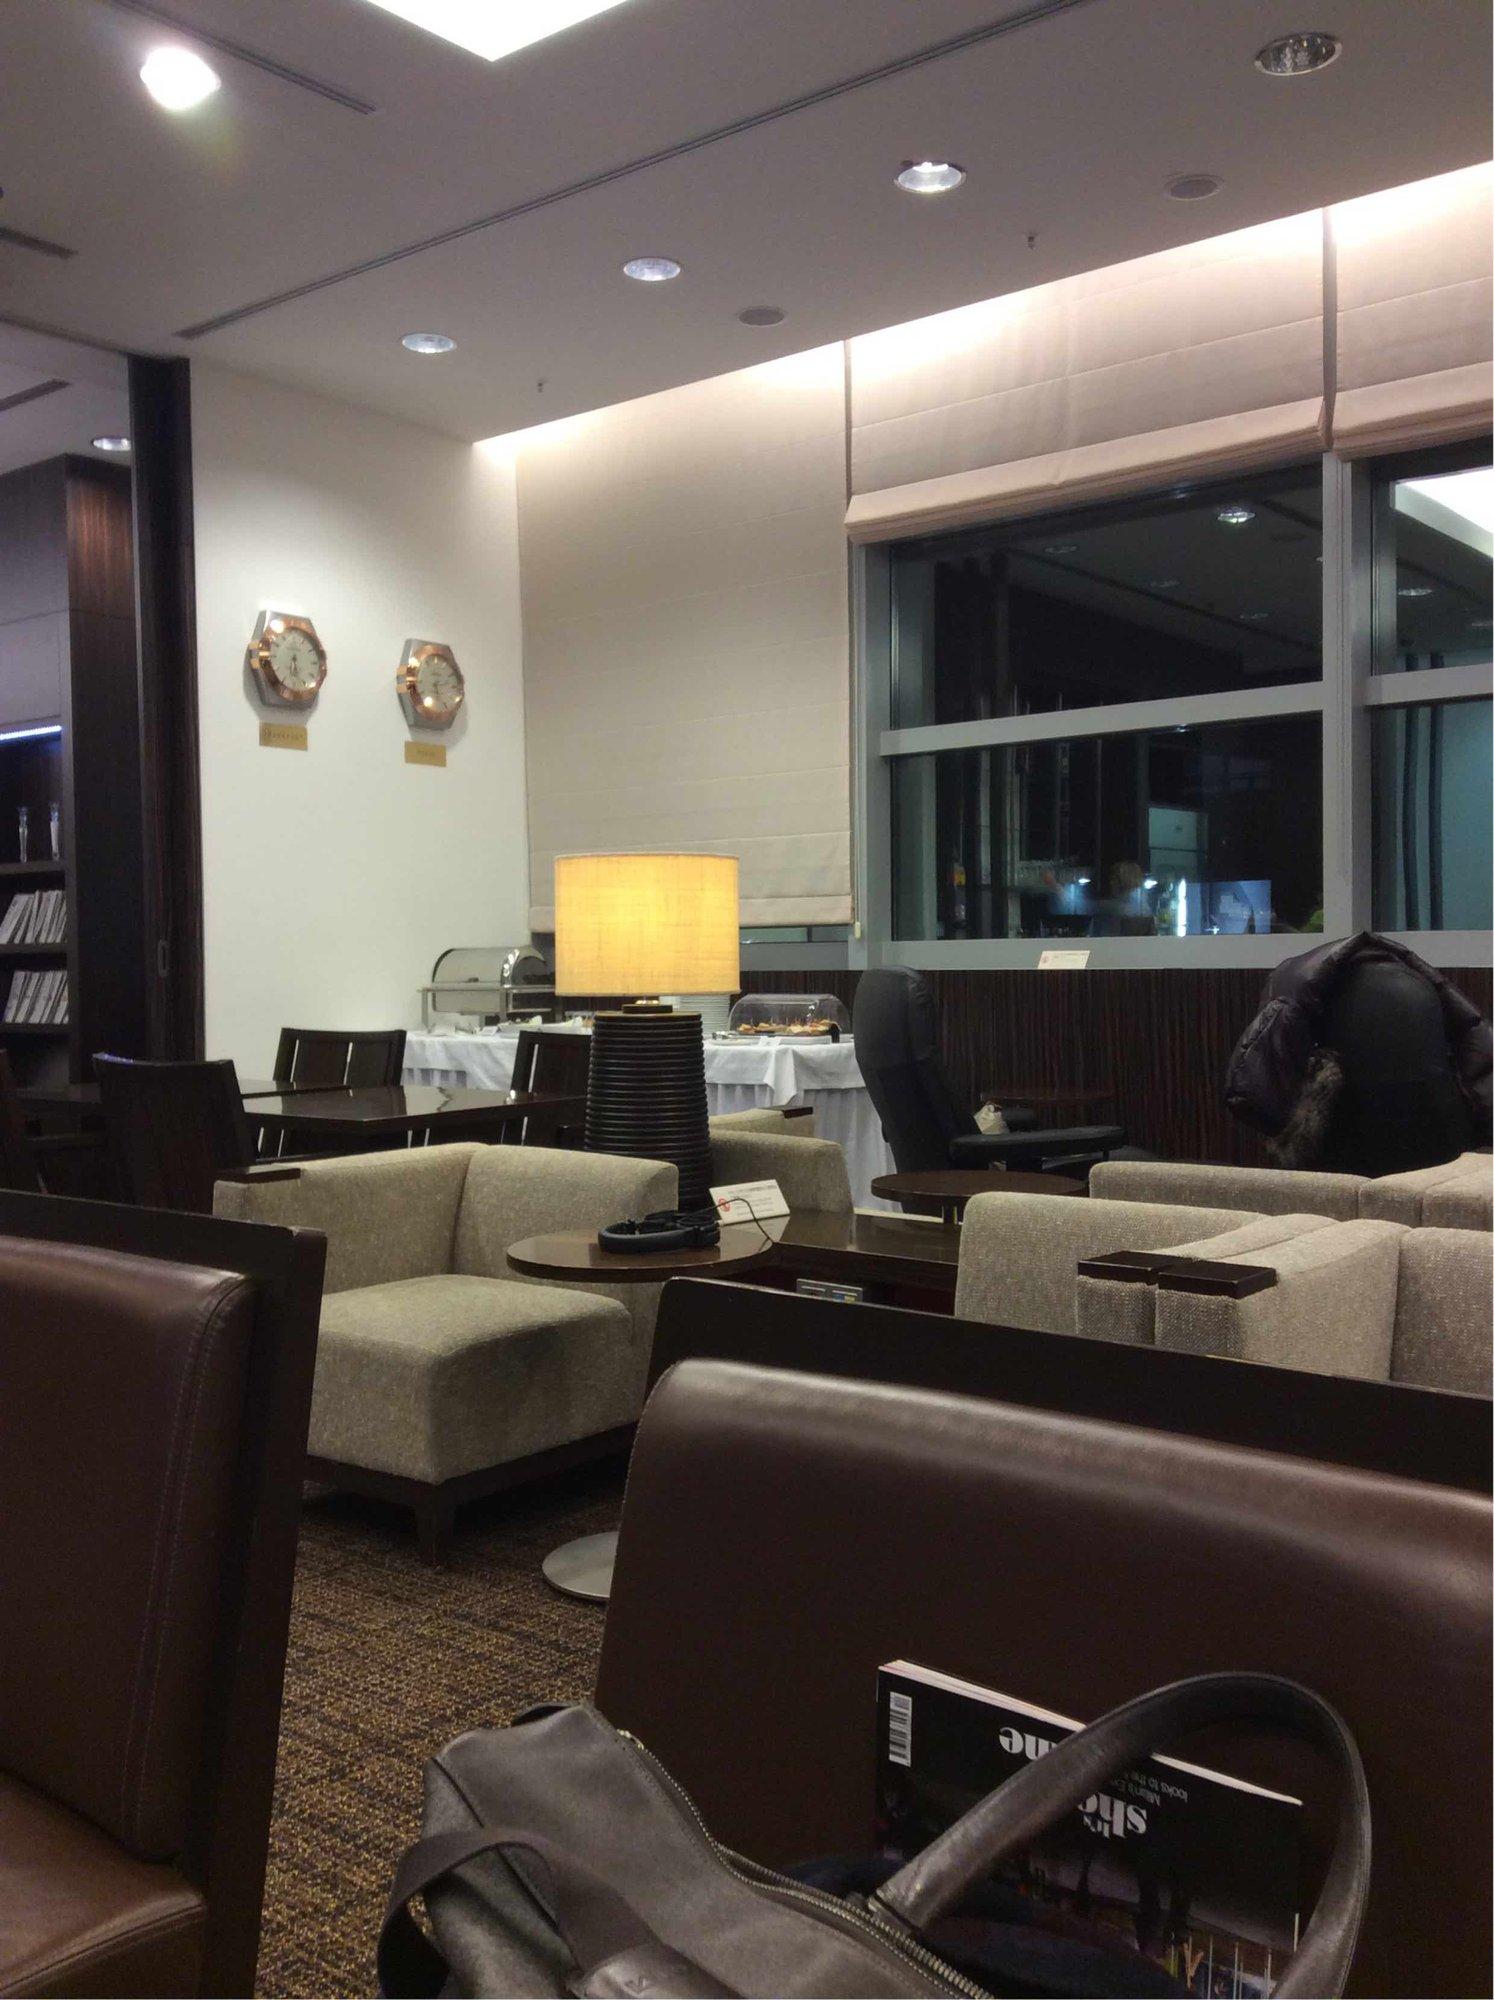 Japan Airlines JAL First Class Lounge image 2 of 10